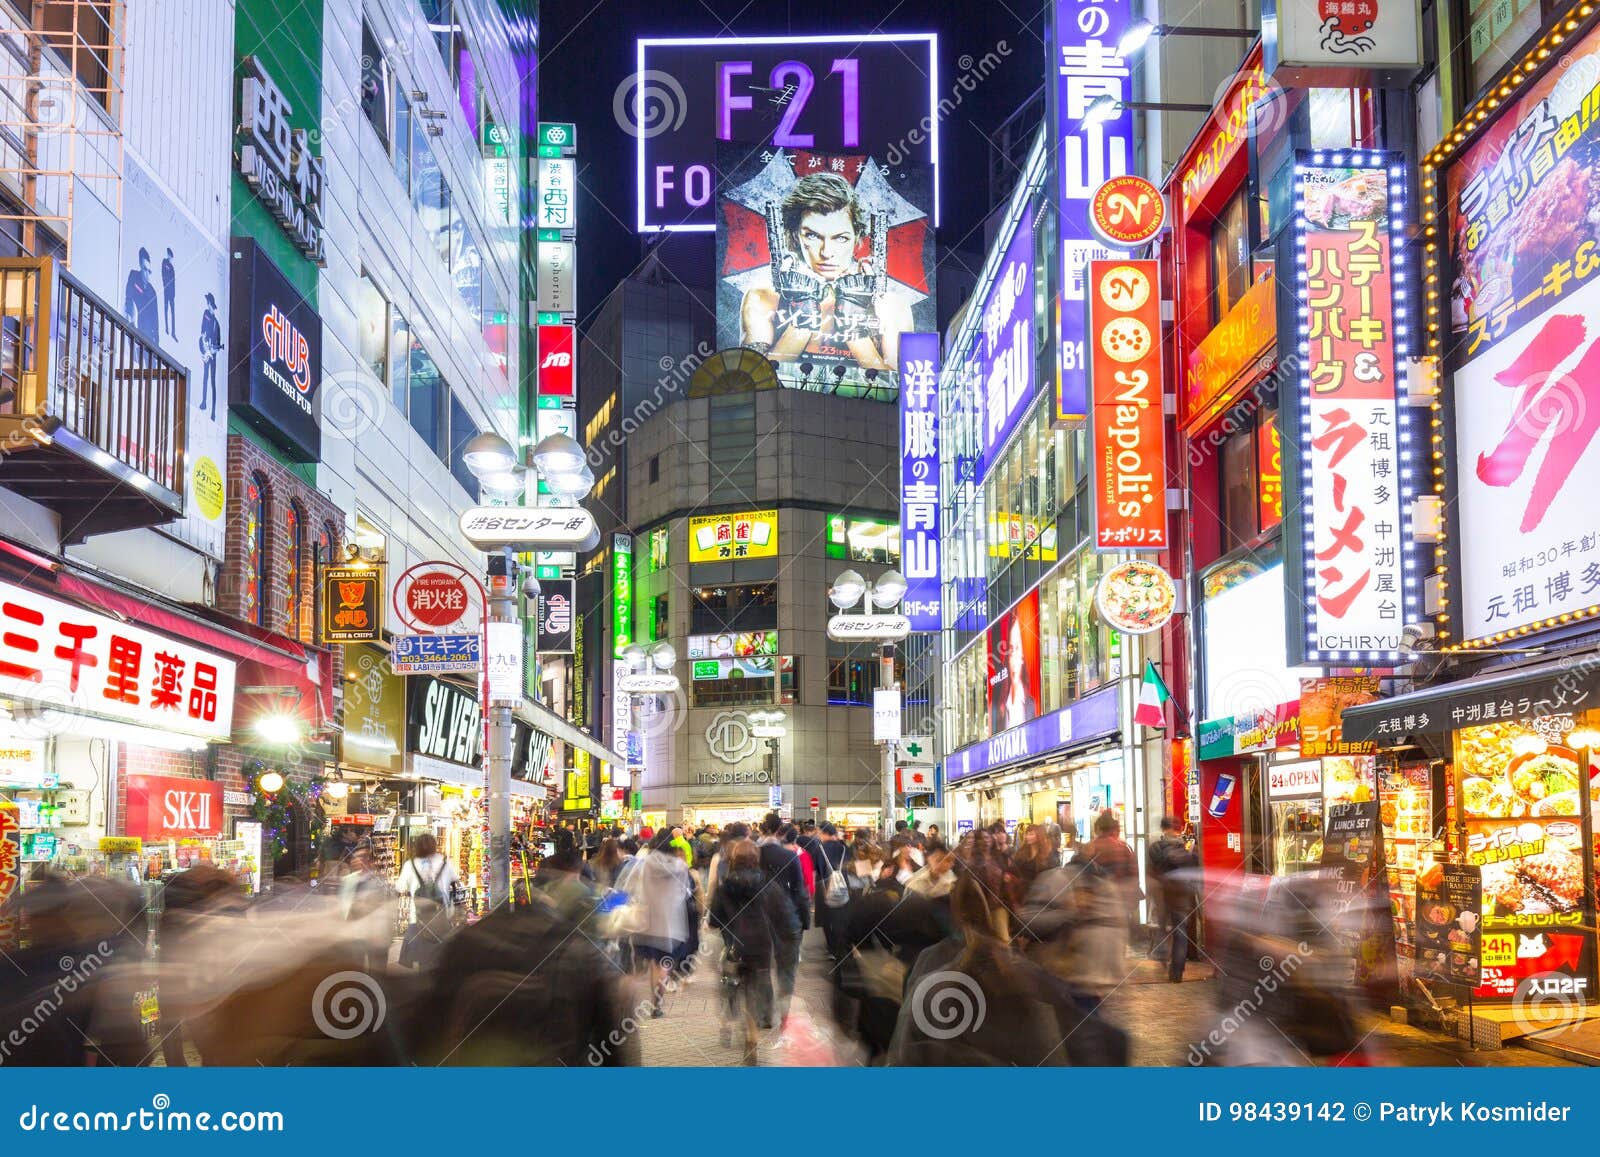 Busy Streets Of Shibuya District In Tokyo At Night Japan Editorial Photography Image Of Destination Cityscape